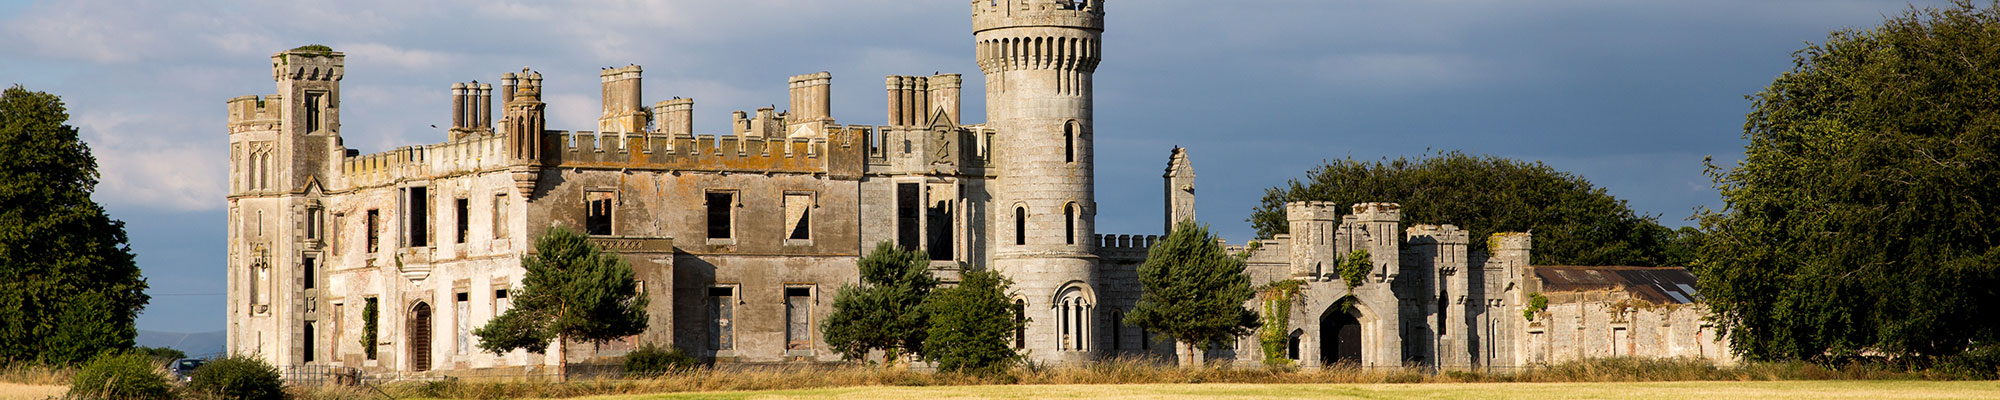 Ducketts grove ruins. Old castle ruins in Co. Carlow. Tourist attraction point. Ireland